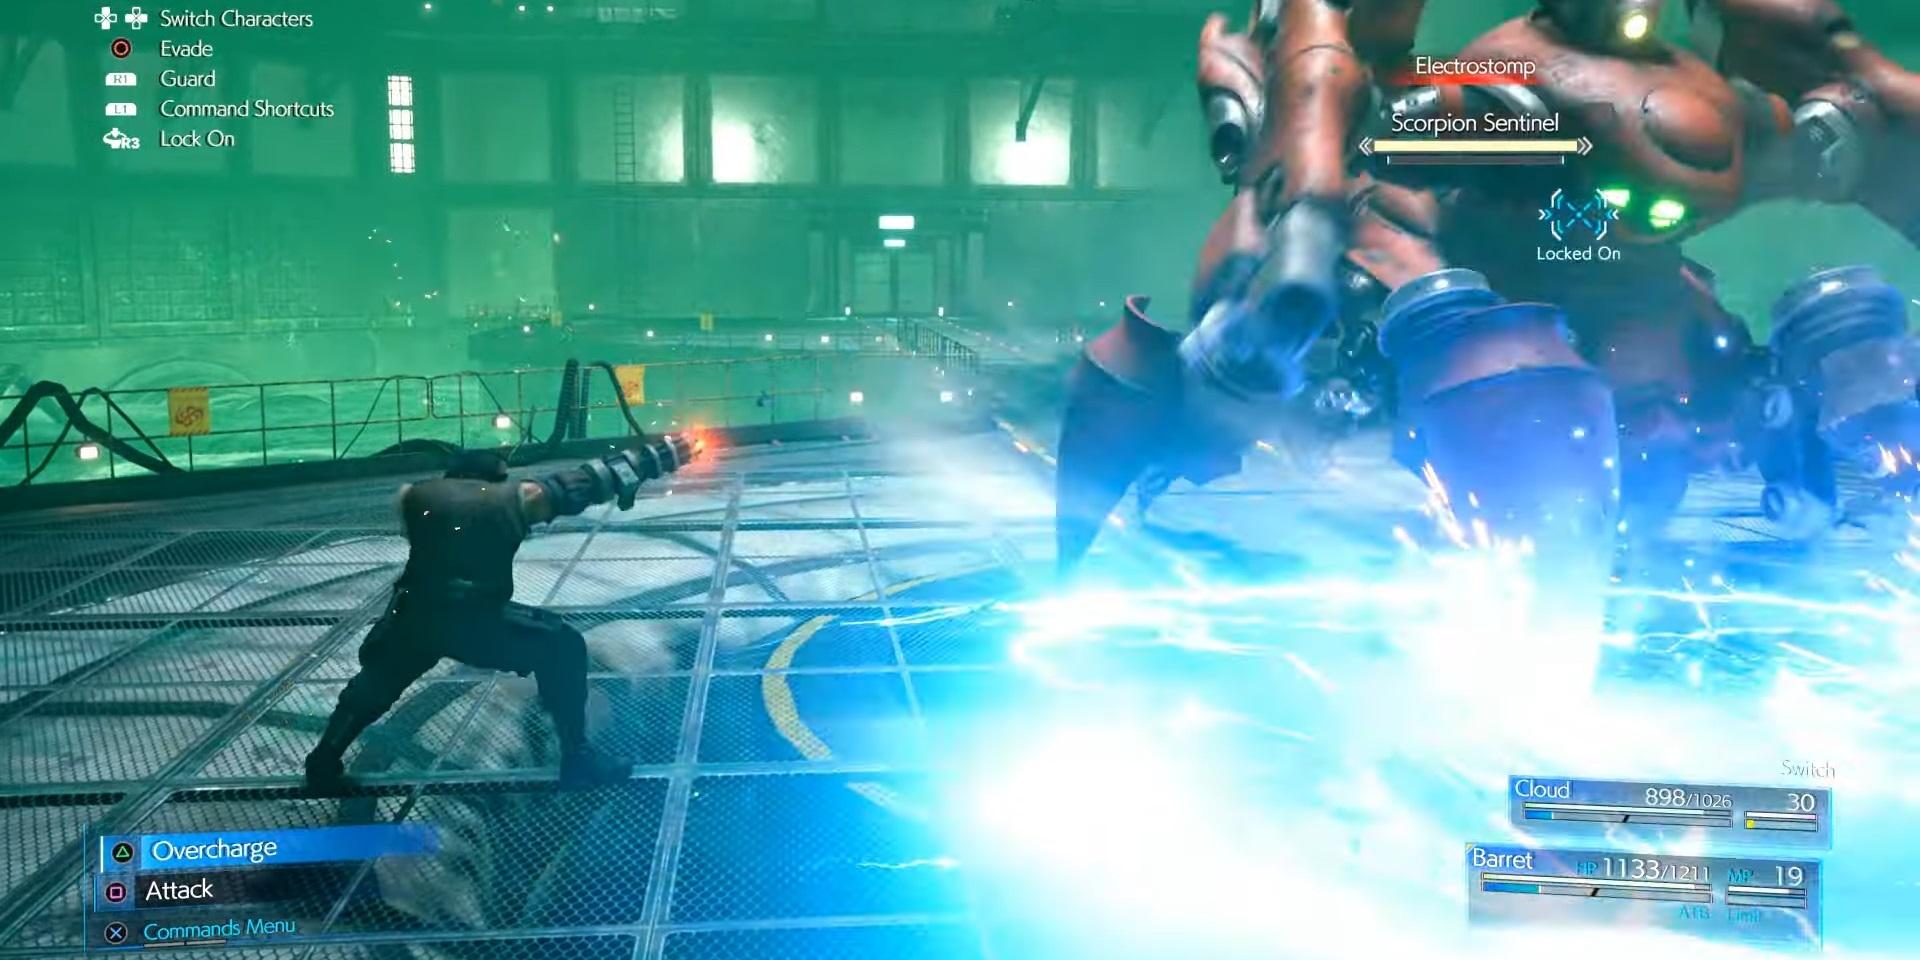 final fantasy 7 remake the scorpion sentinel uses an area attack